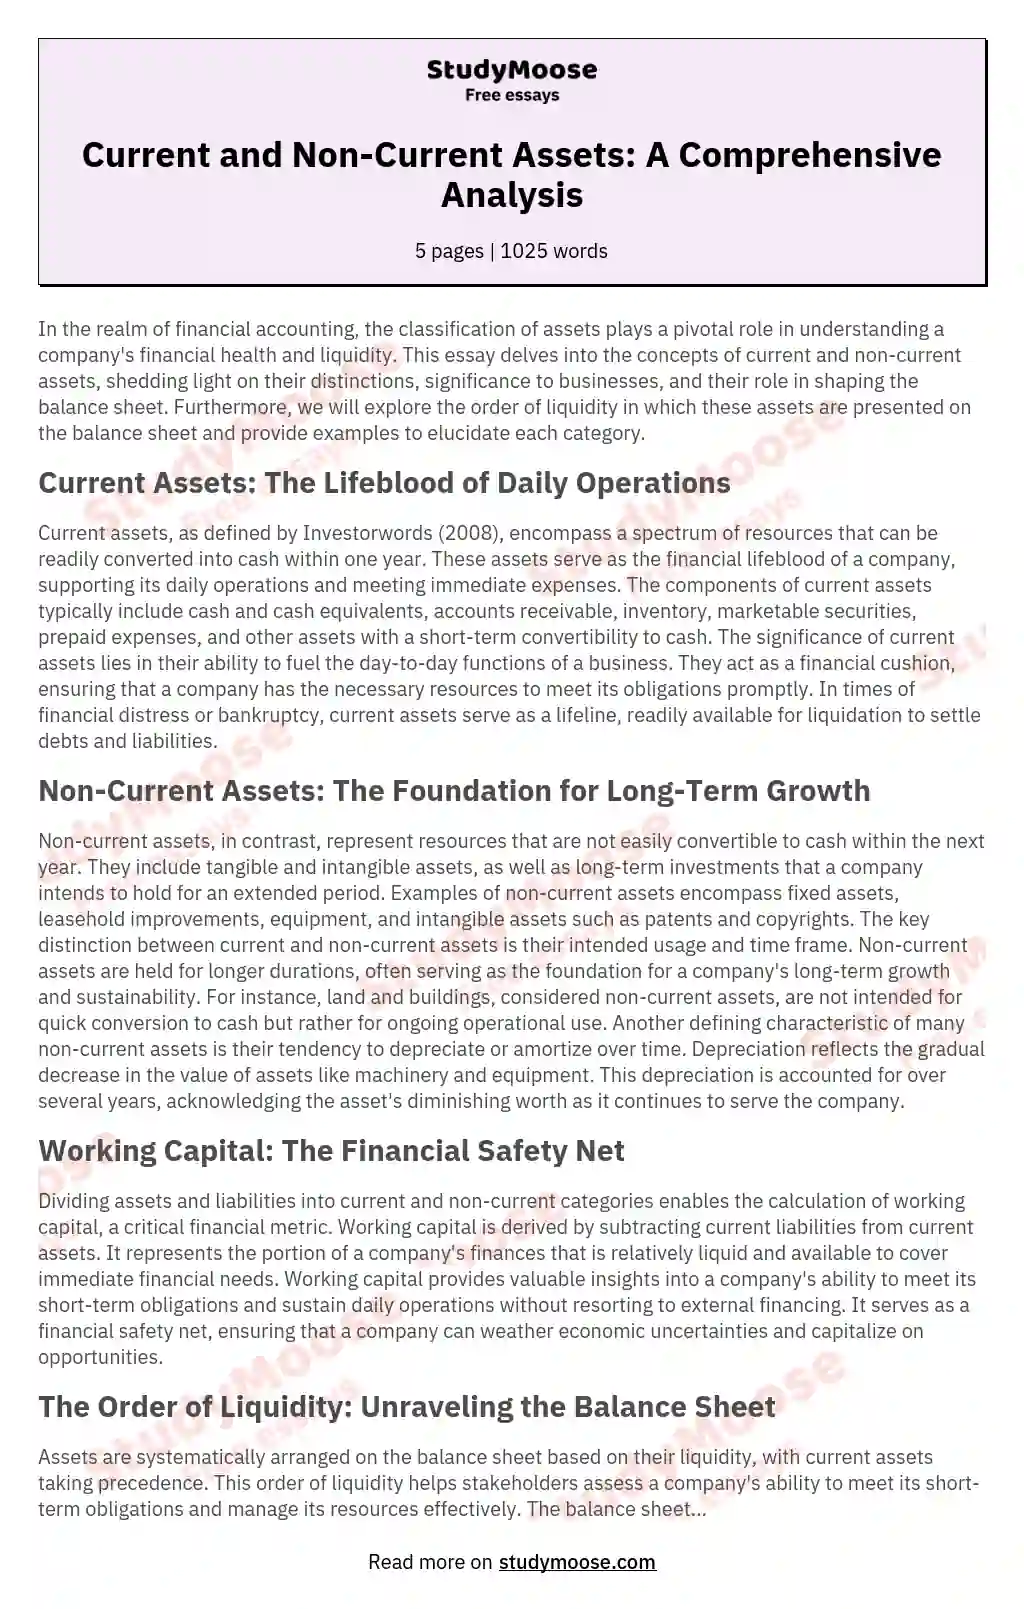 Current and Non-Current Assets: A Comprehensive Analysis essay